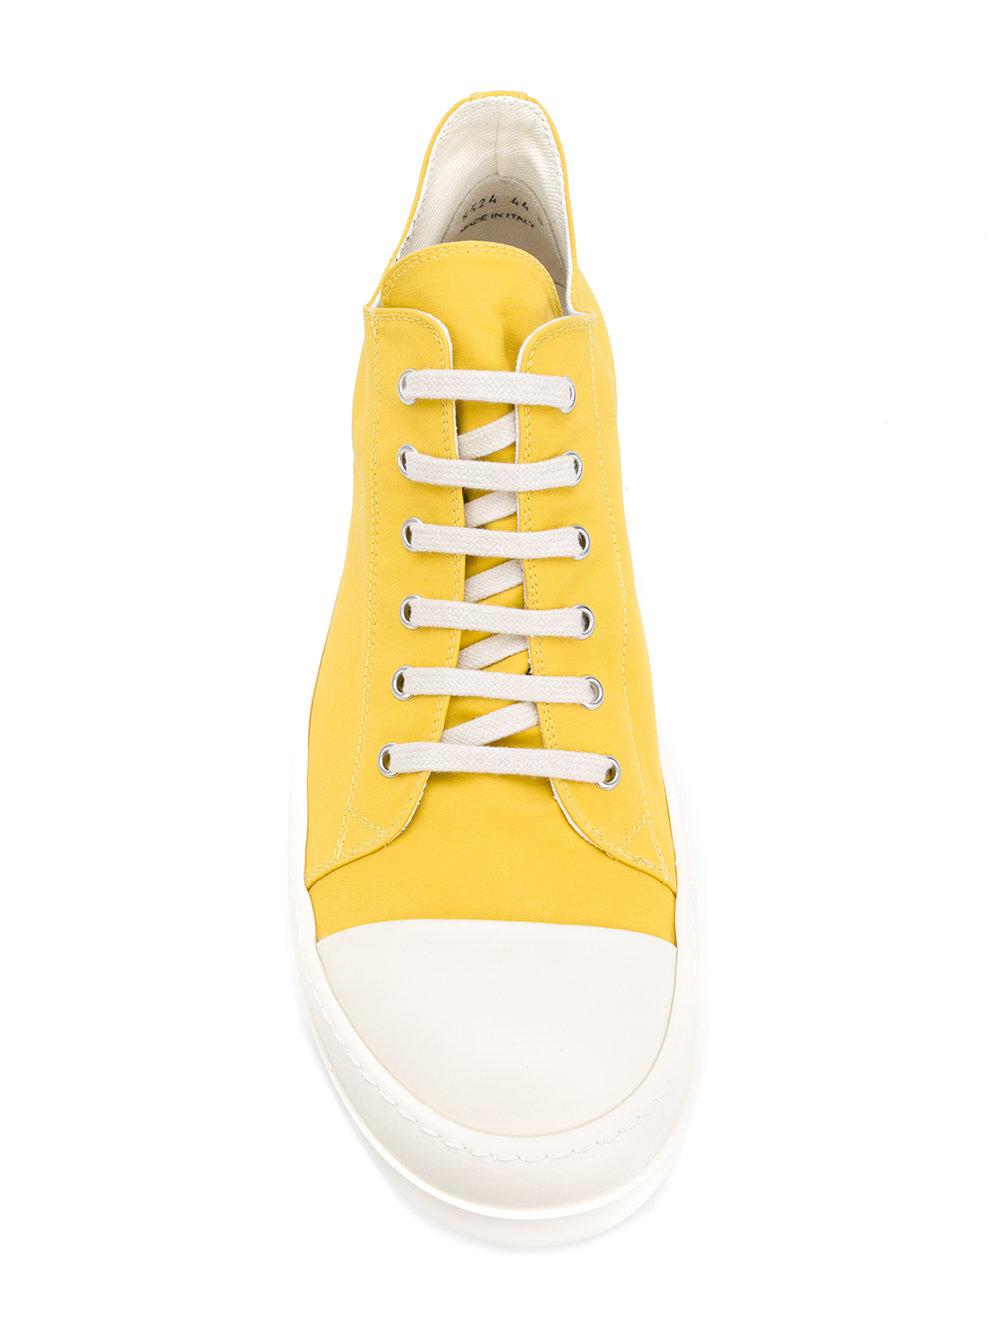 Rick Owens Drkshdw Cotton Lace-up Sneakers in Yellow & Orange (Yellow ...